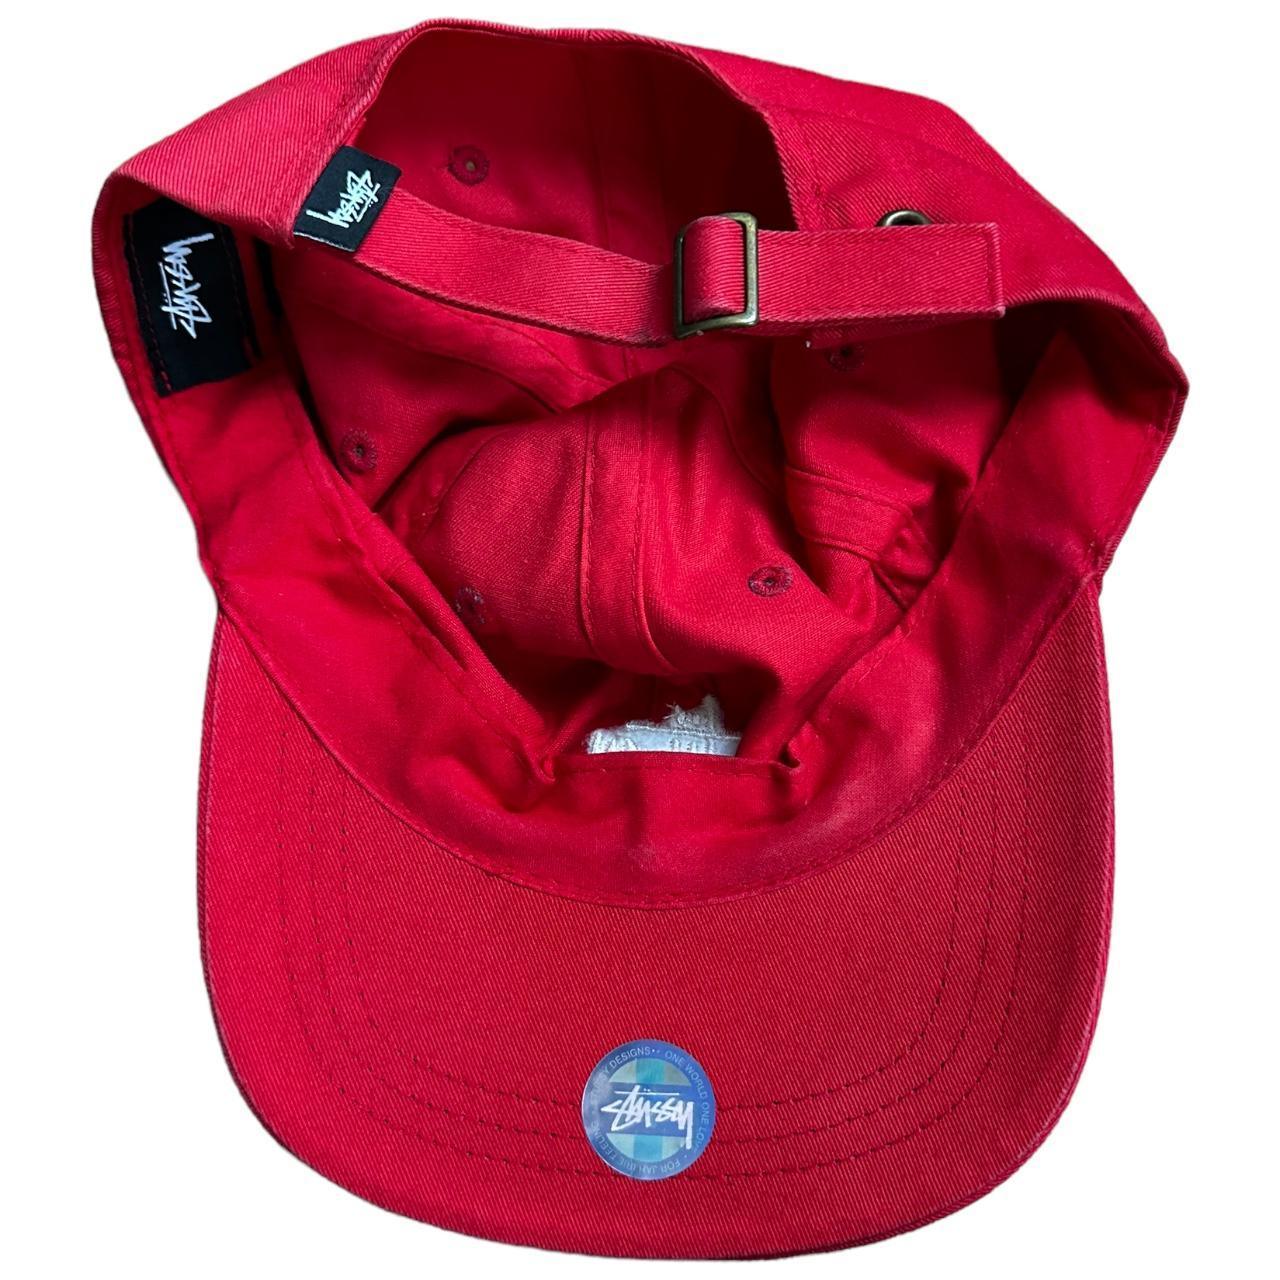 Stussy Red Logo Hat / Cap - Known Source